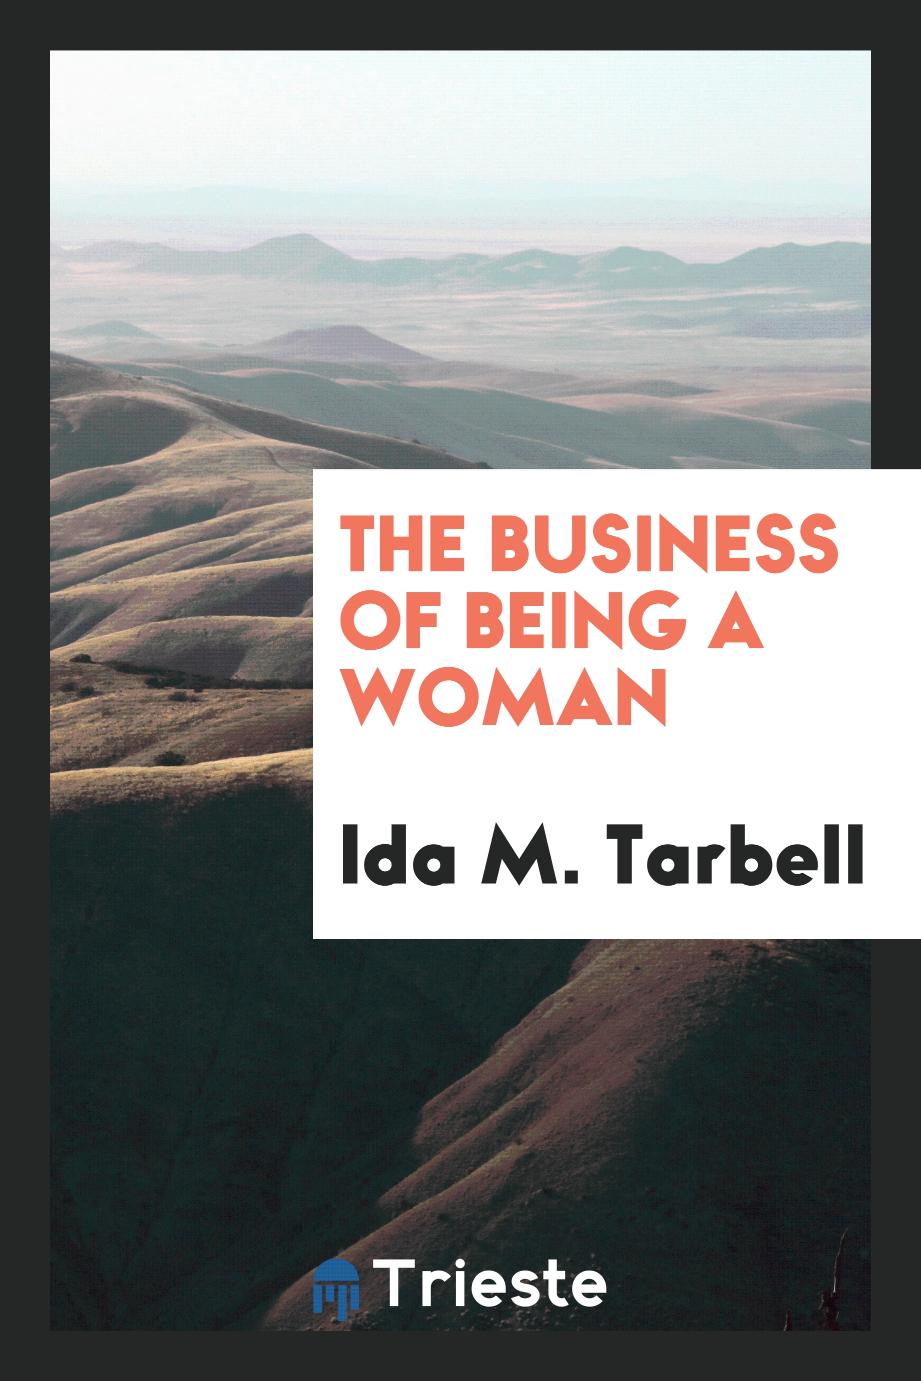 The business of being a woman